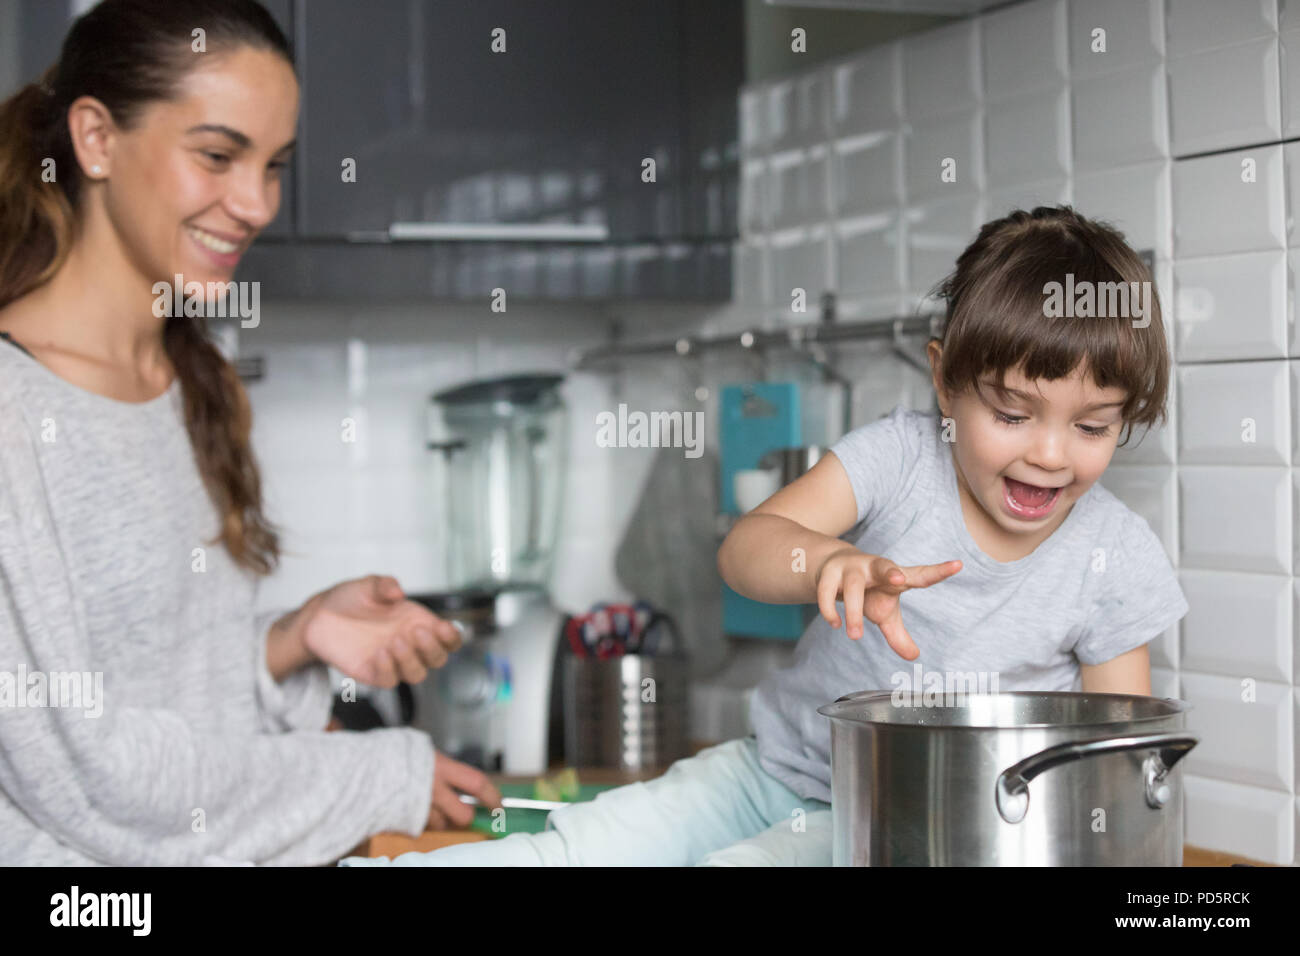 https://c8.alamy.com/comp/PD5RCK/curious-girl-playing-with-pot-cooking-with-mom-in-kitchen-PD5RCK.jpg